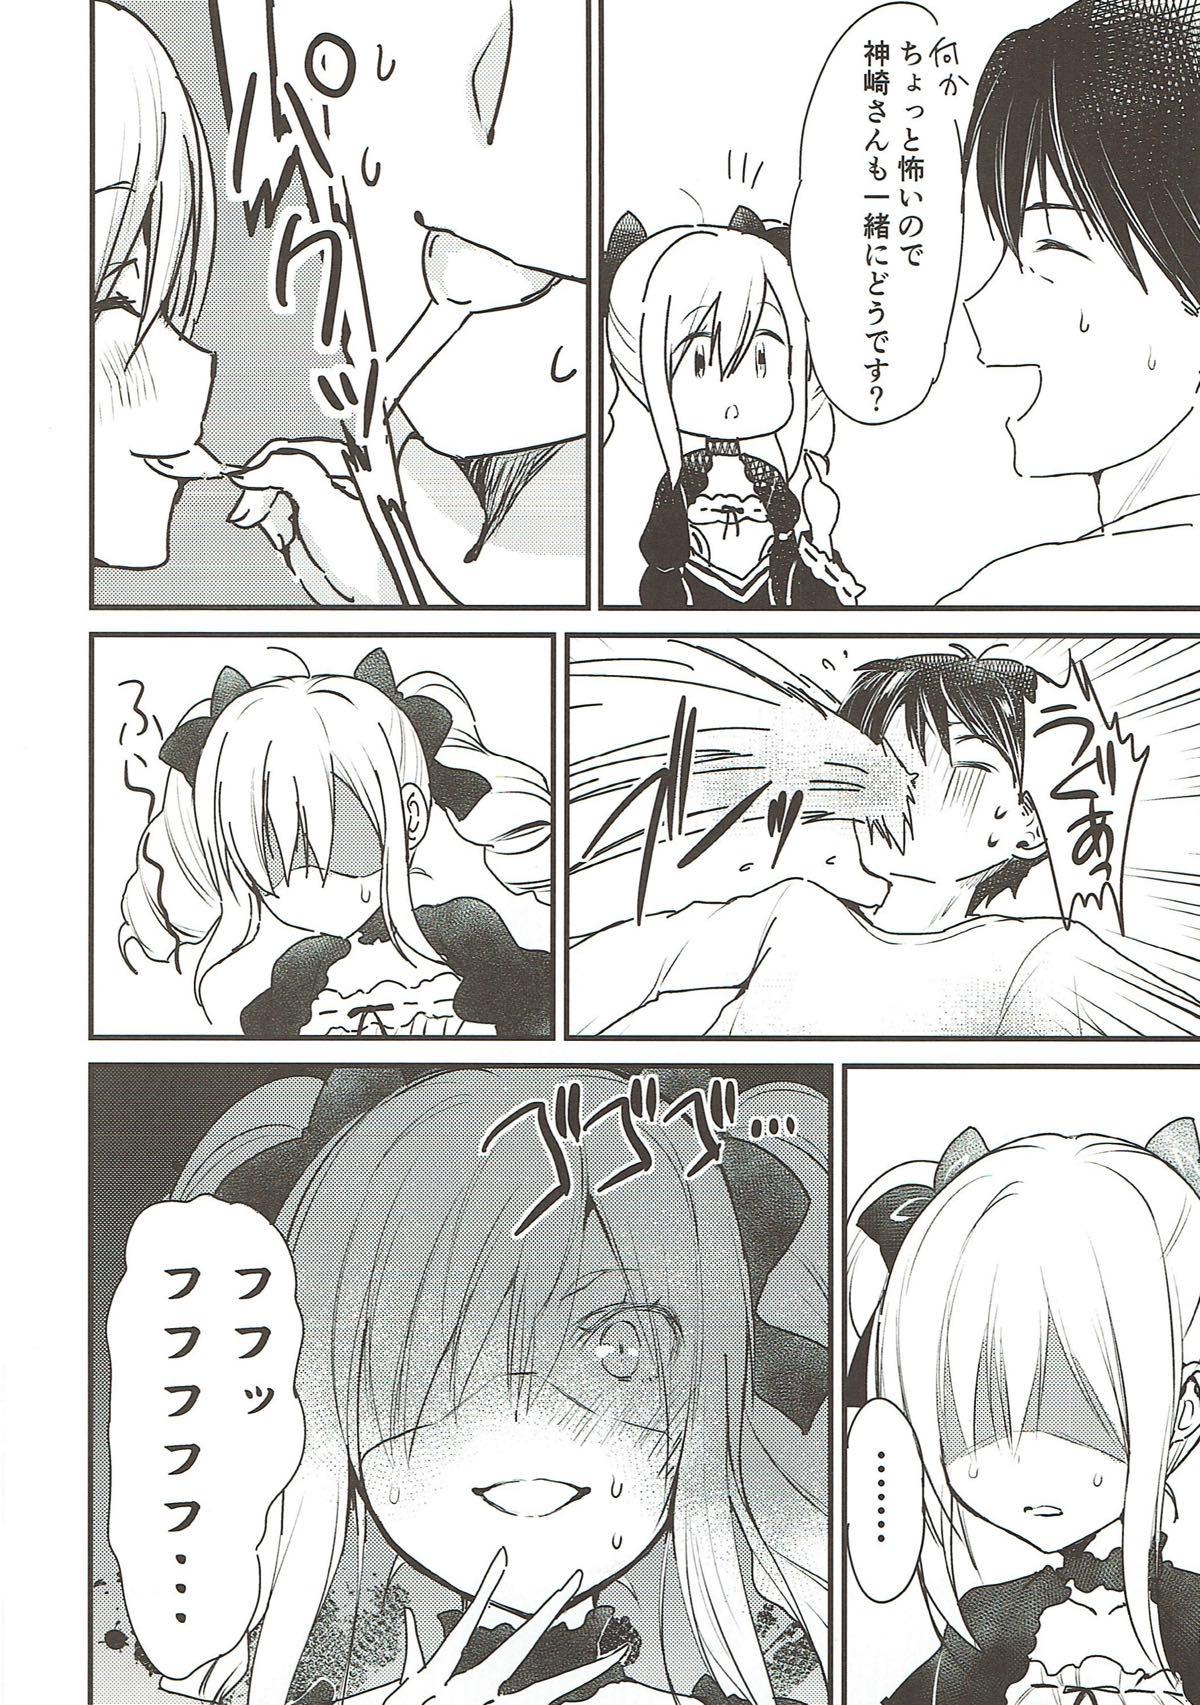 Classy Ranko-chan no Mousou Note 2 - The idolmaster Indonesian - Page 9